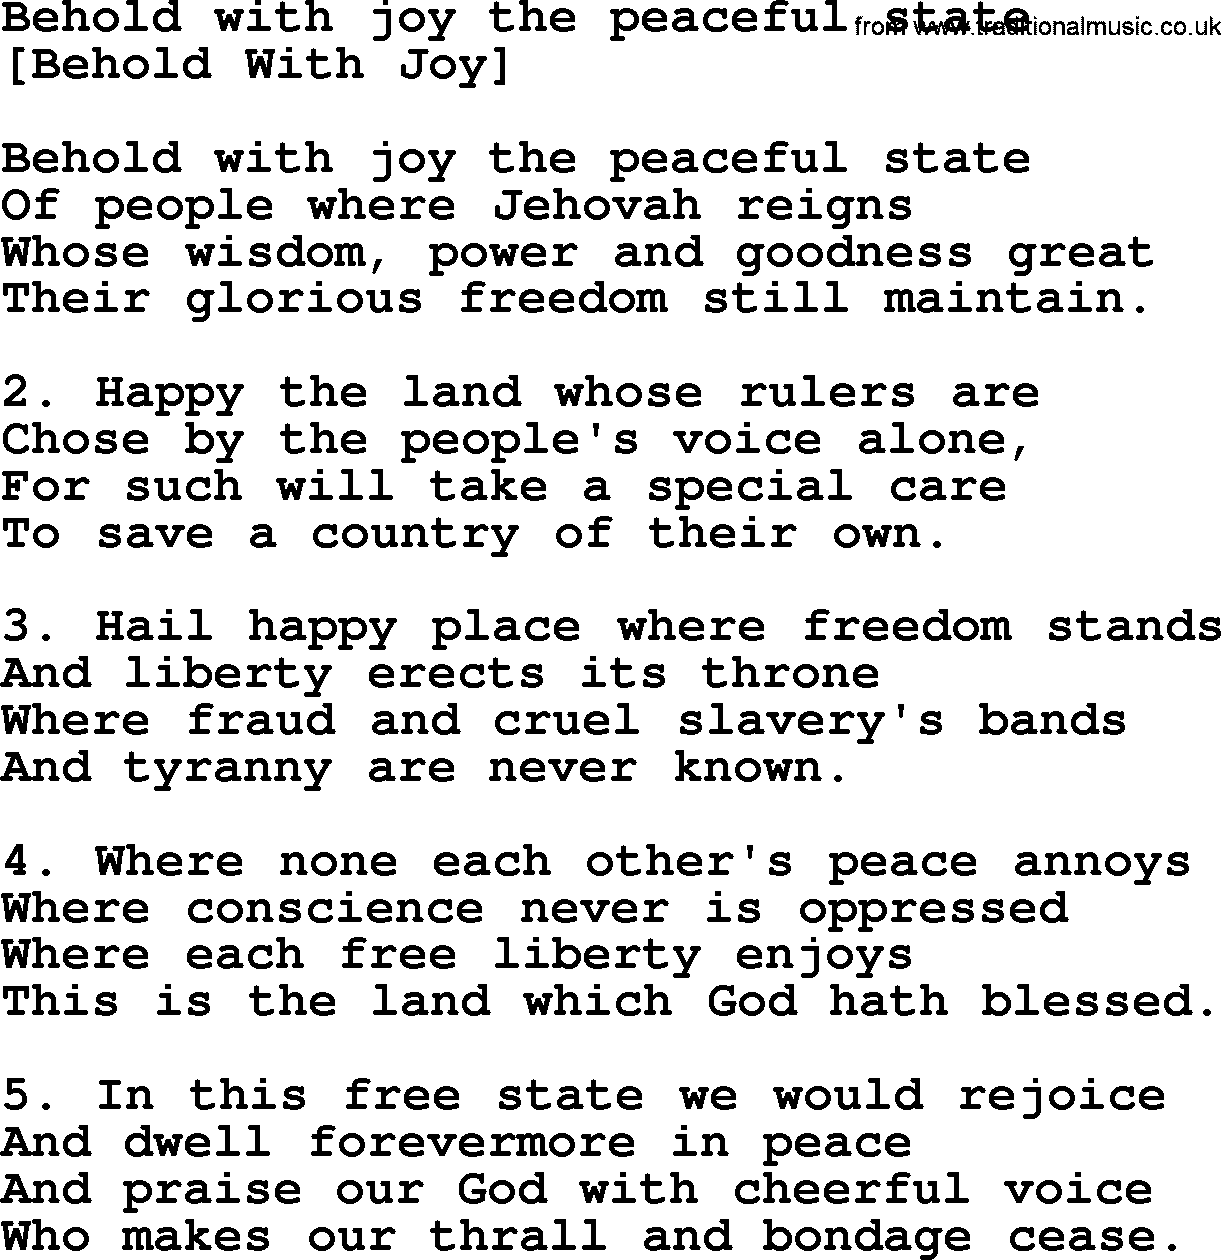 Old American Song: Behold With Joy The Peaceful State, lyrics